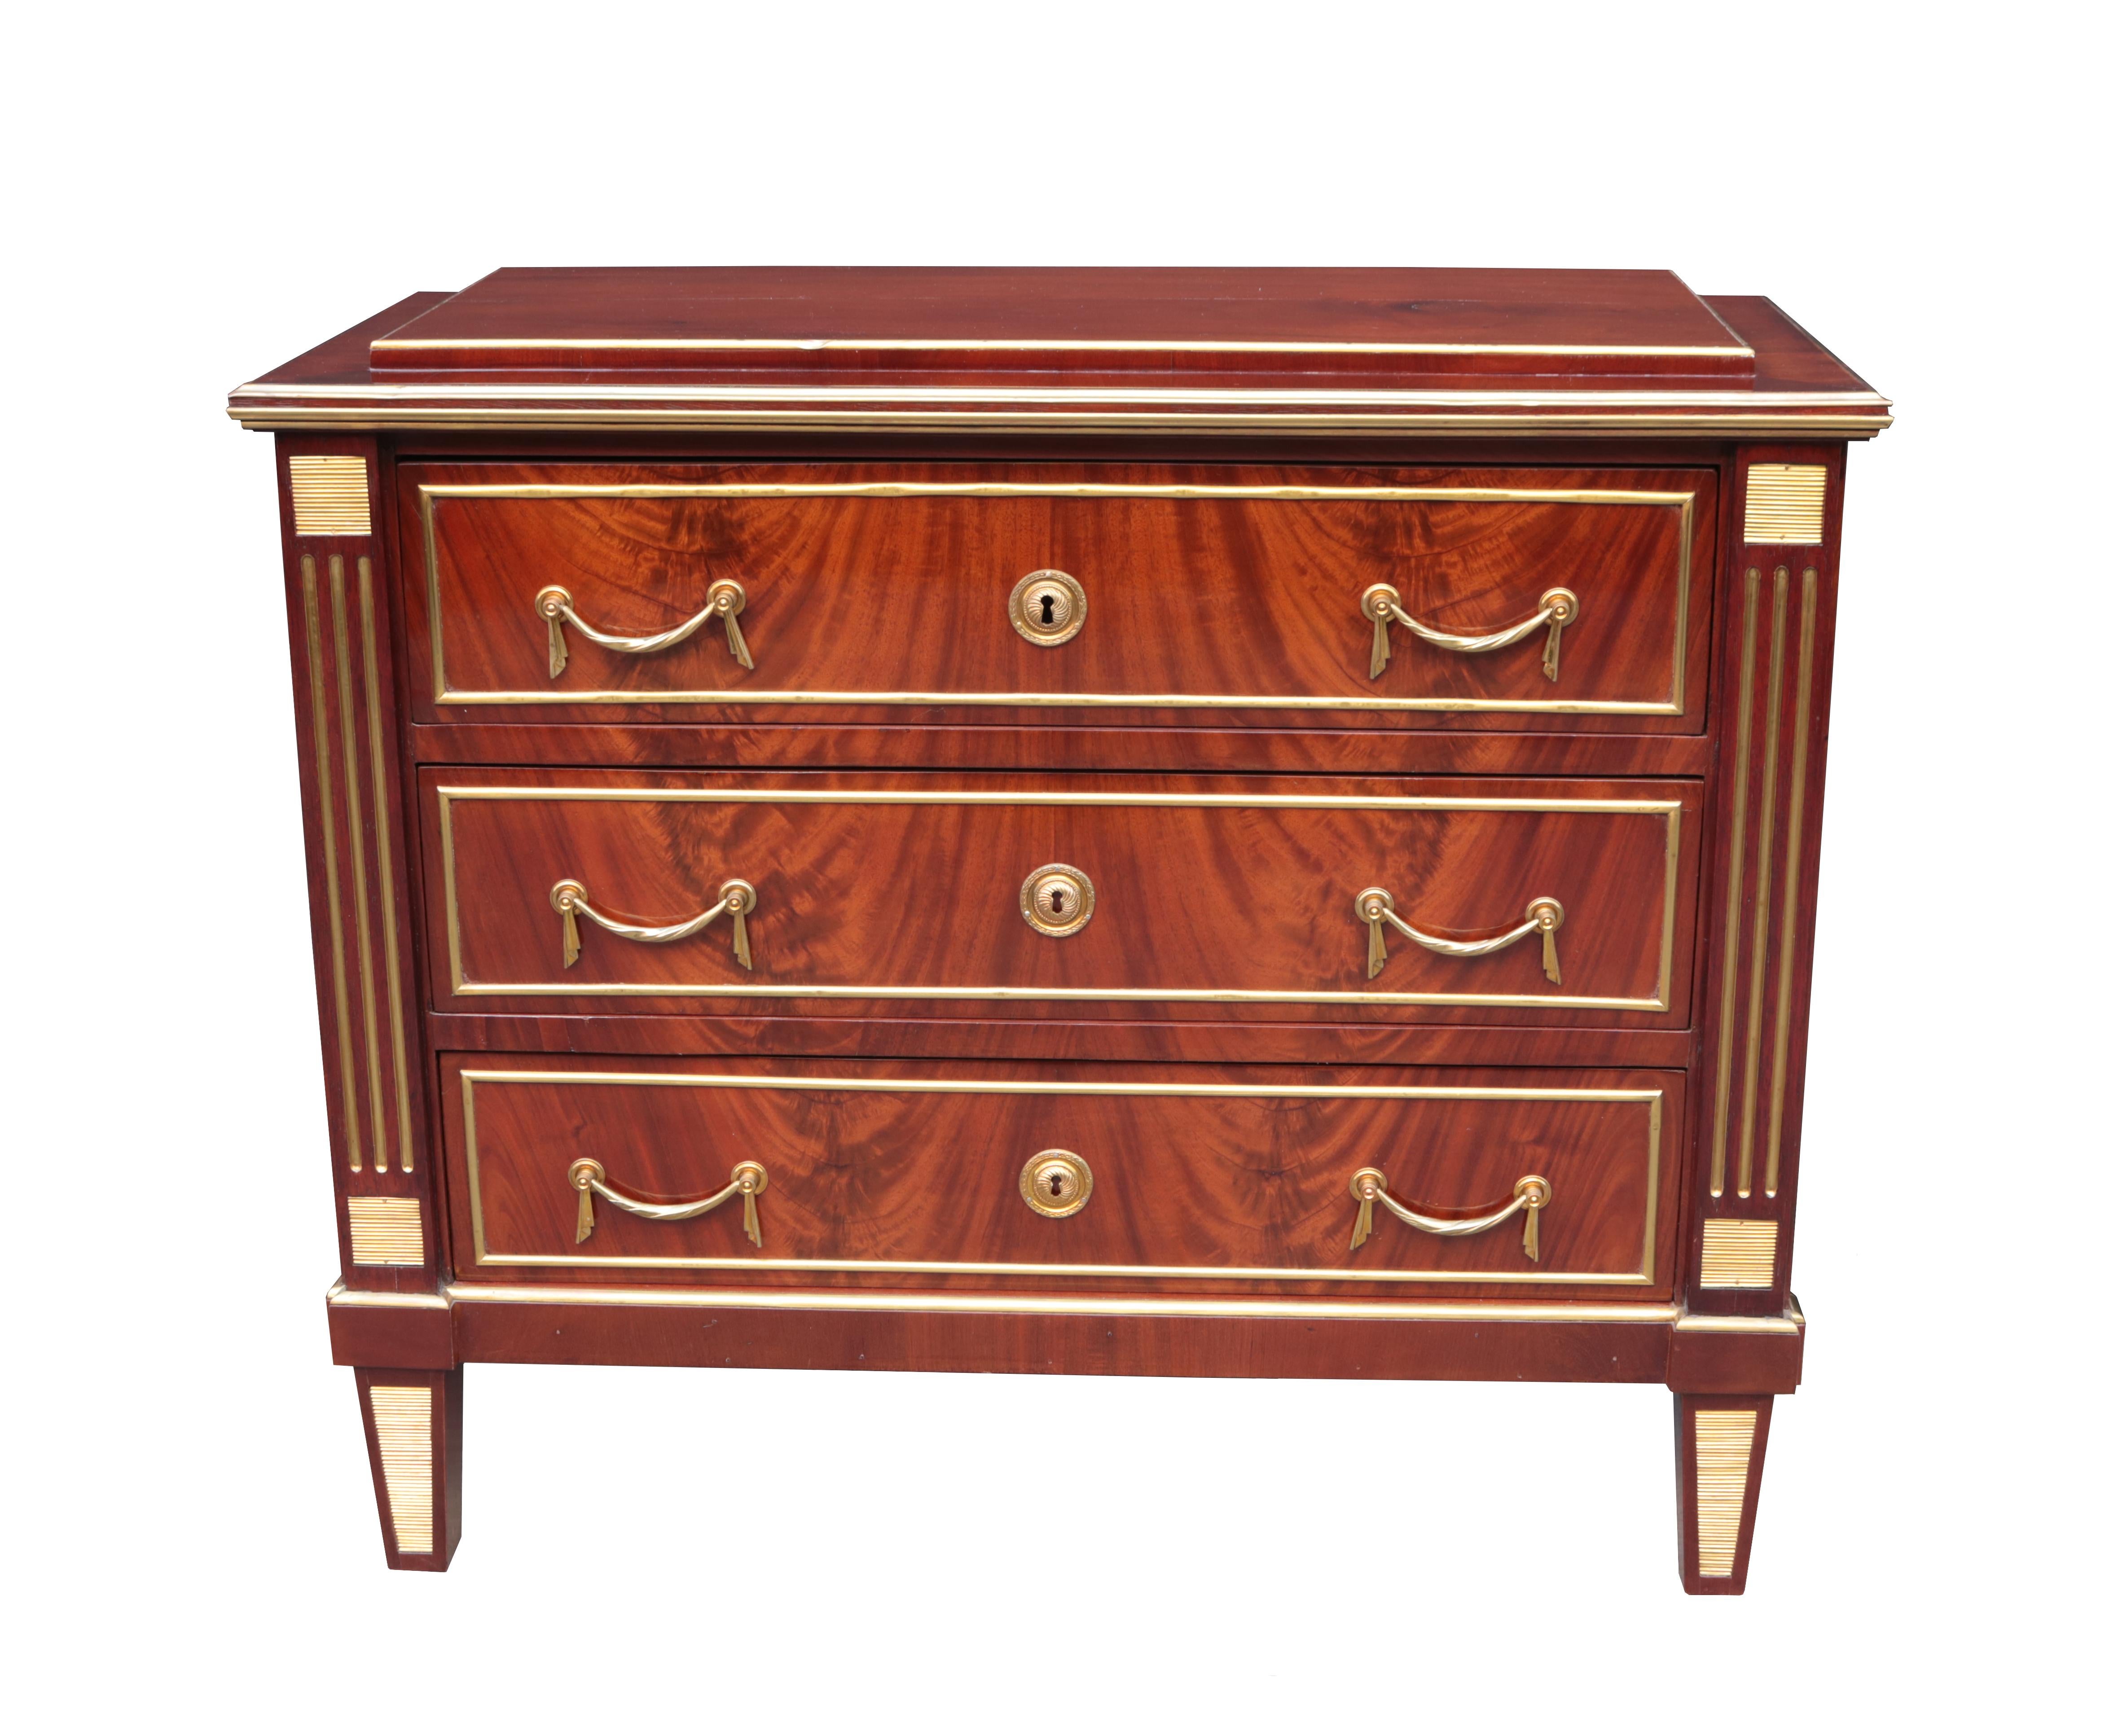 Neoclassical style pair of chests.
Mahogany with brass trim, pulls, sabots and other details.